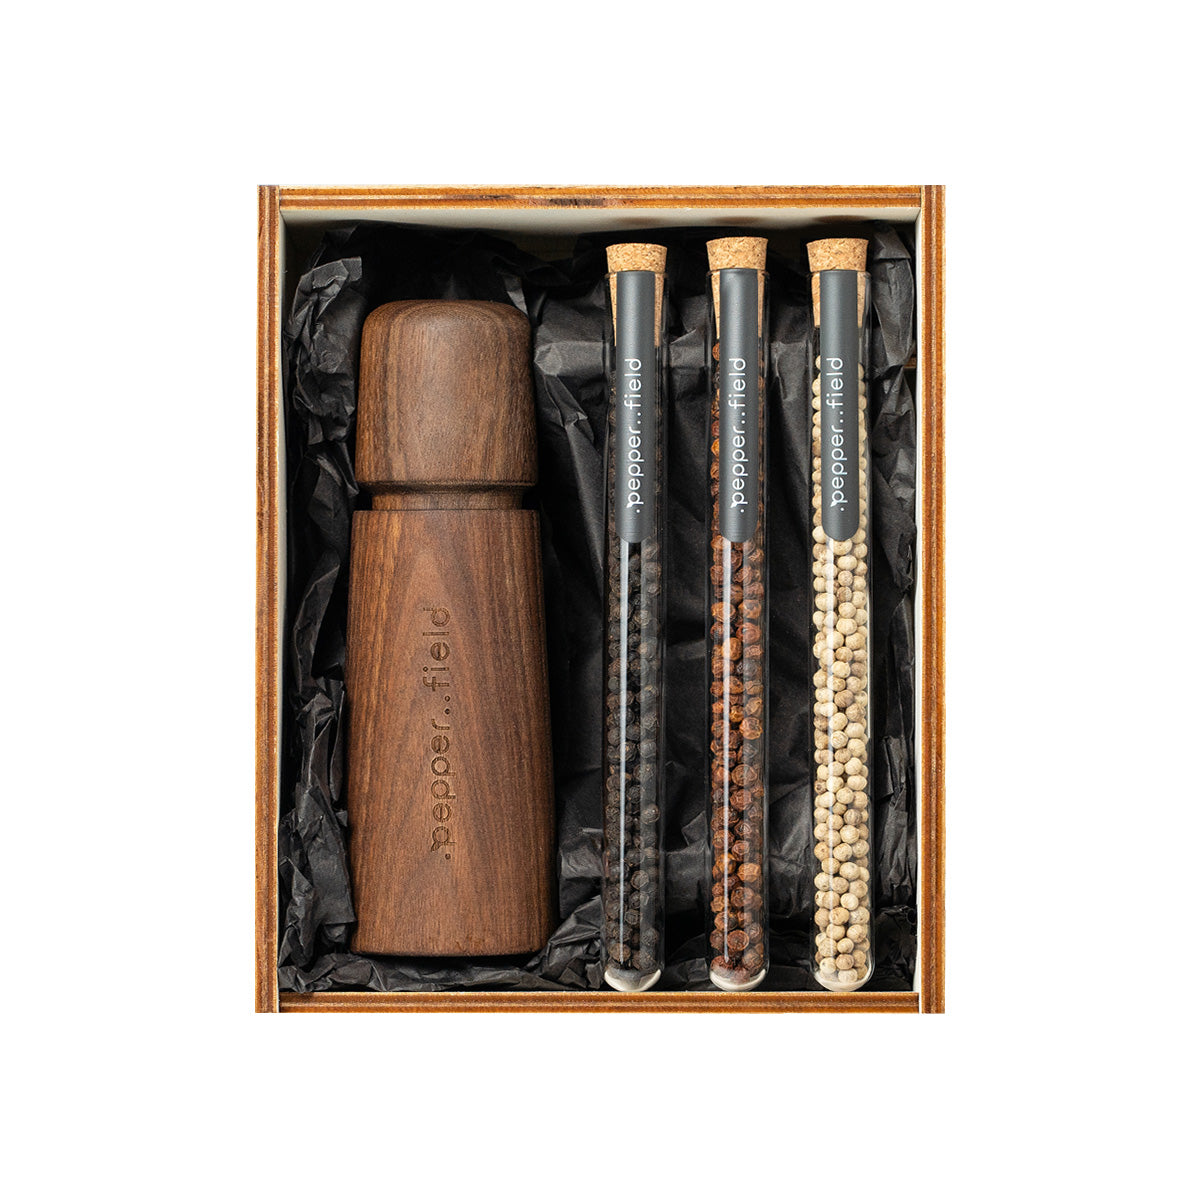 Scandinavian grinder with a set of vials with Kampot pepper in a wooden gift box (3x12g)